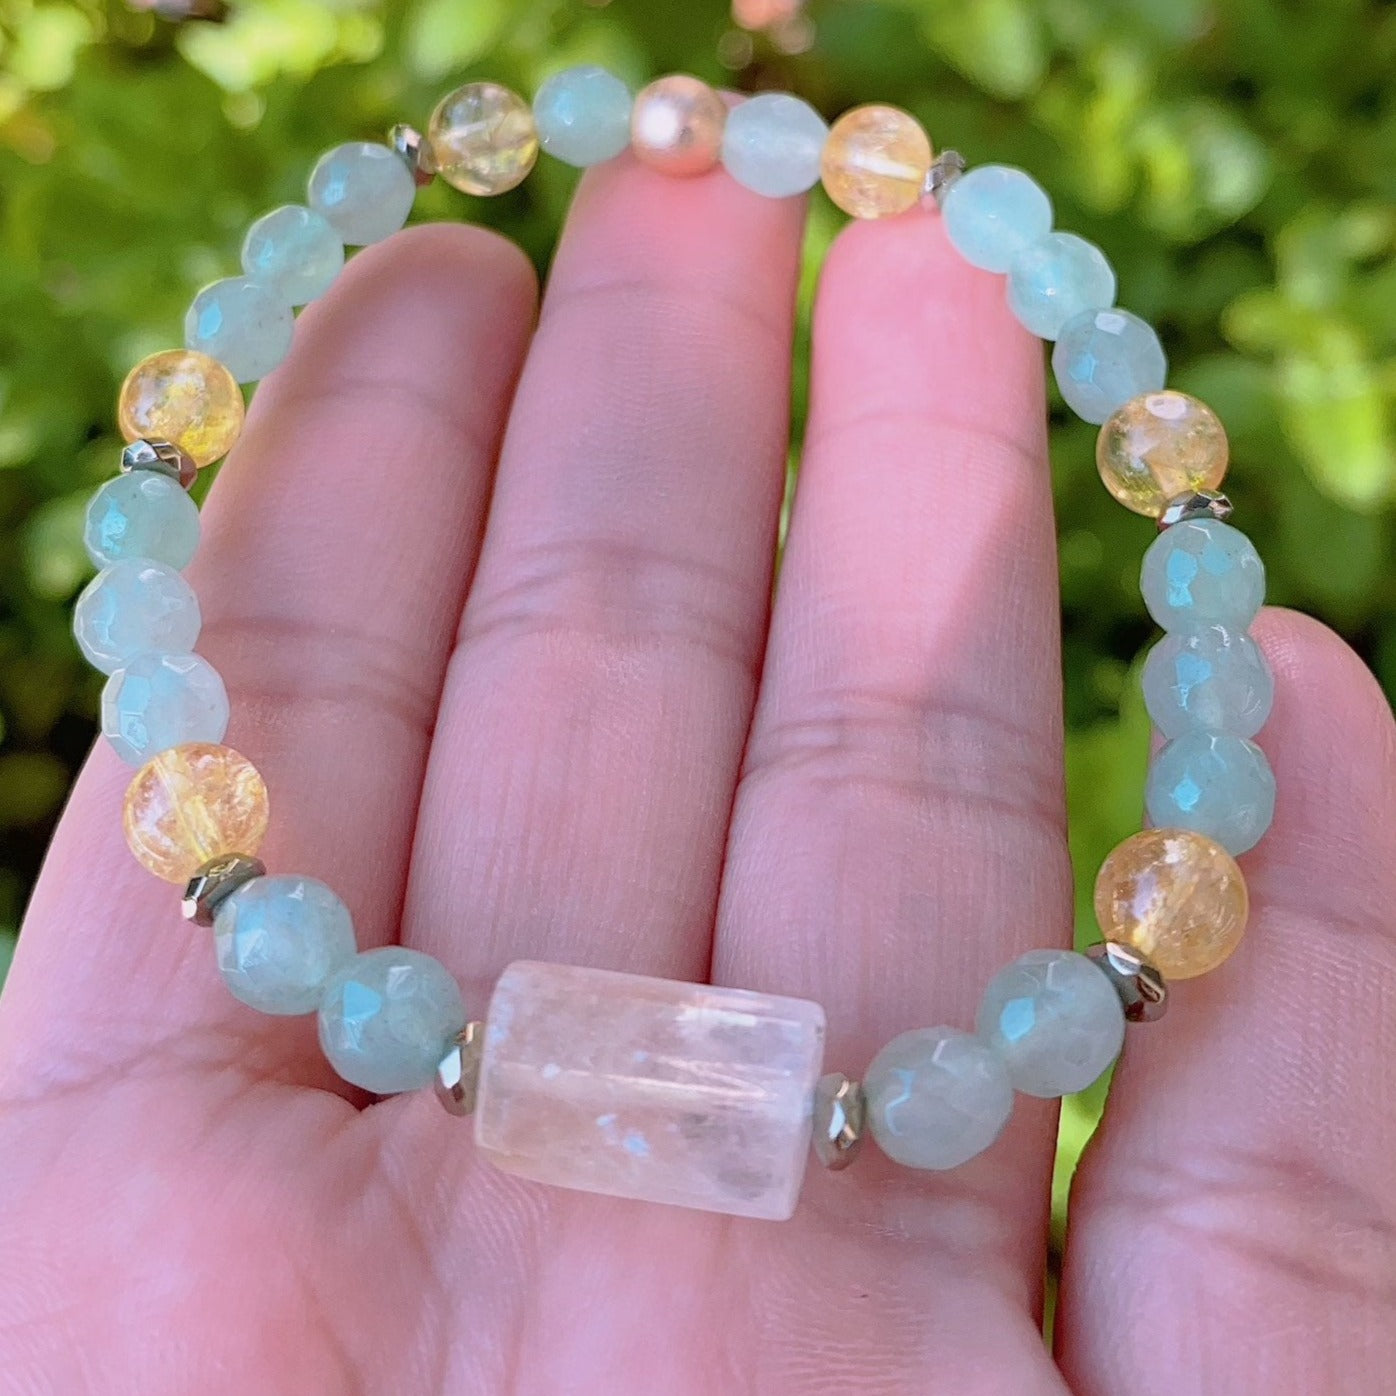 Wealth and Abundance Healing Gemstone Bracelet featuring the top  Crystals for Abundance such as Green Aventurine, Citrine, and Pyrite.